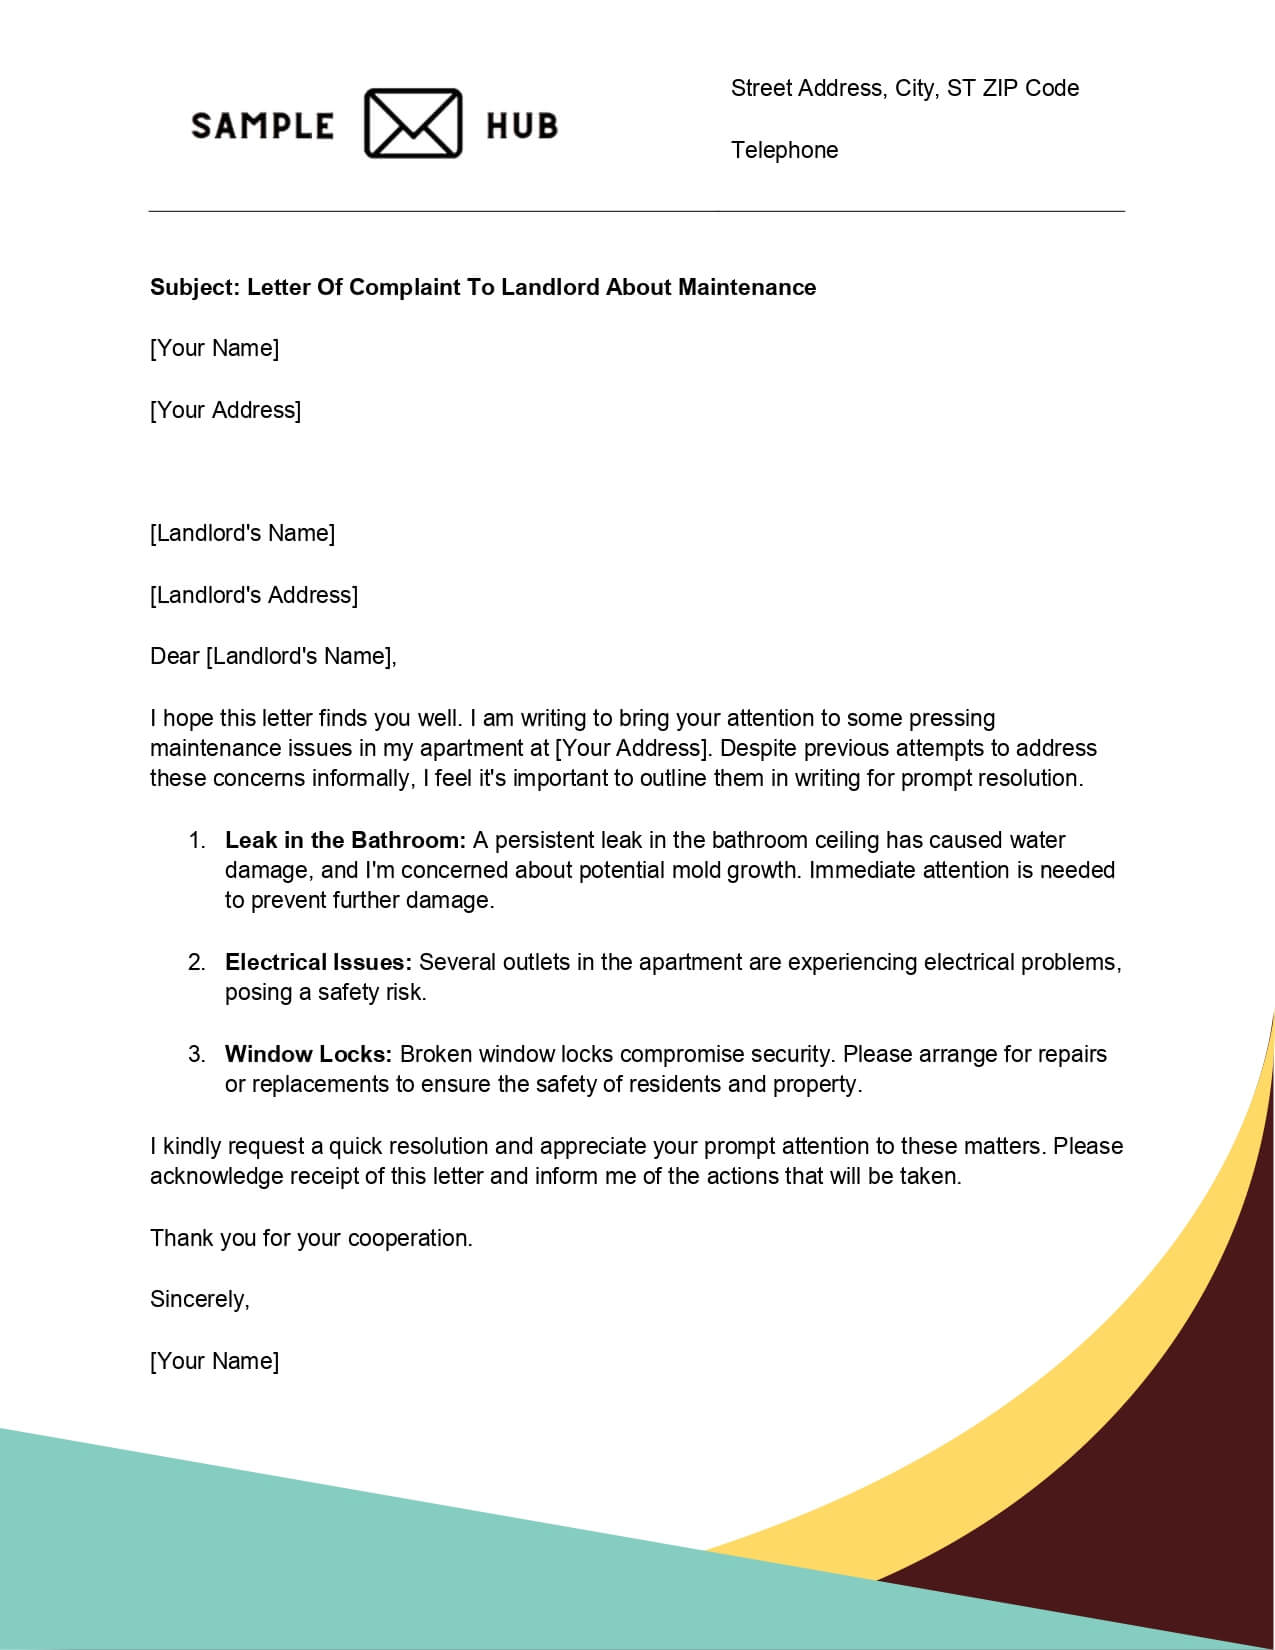 Letter Of Complaint To Landlord About Maintenance